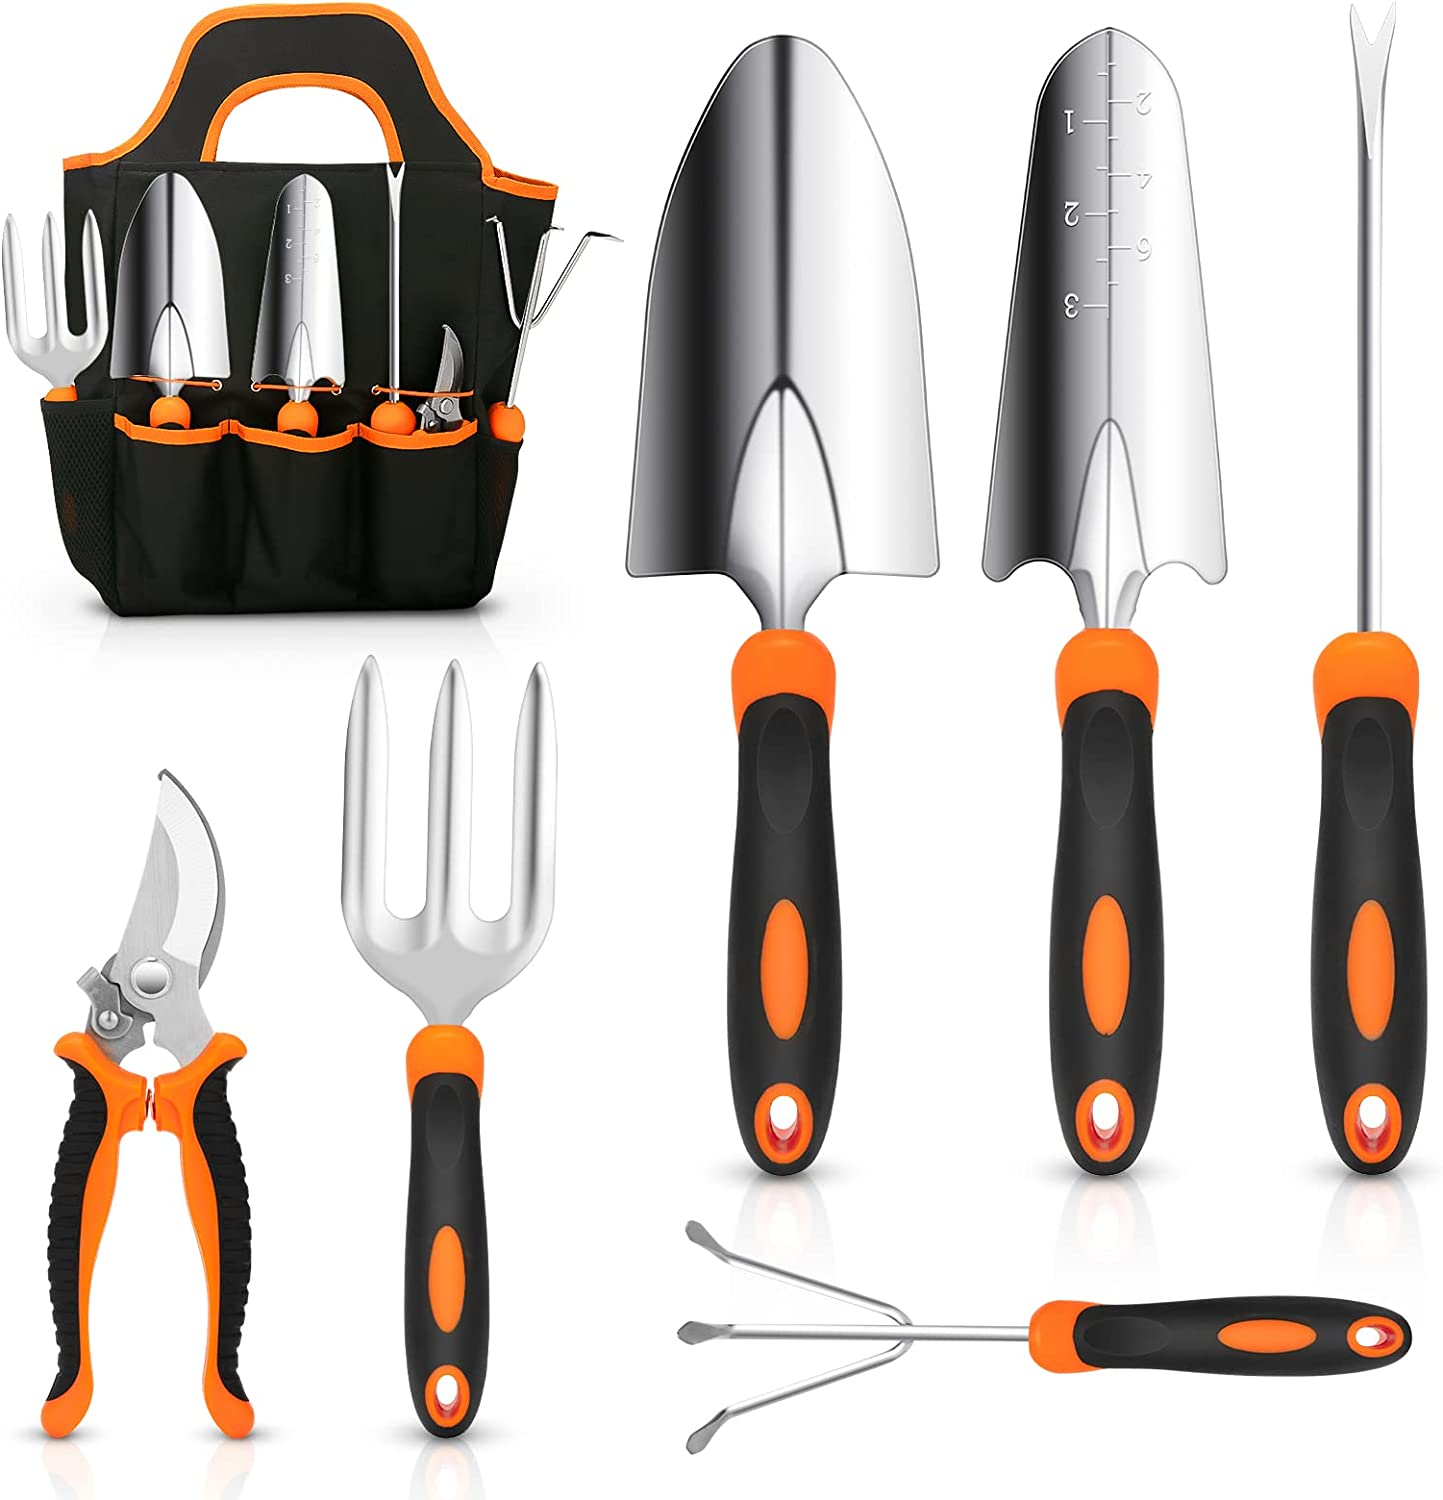 CHRYZTAL Stainless Steel Easy Clean Garden Tools, 7-Piece